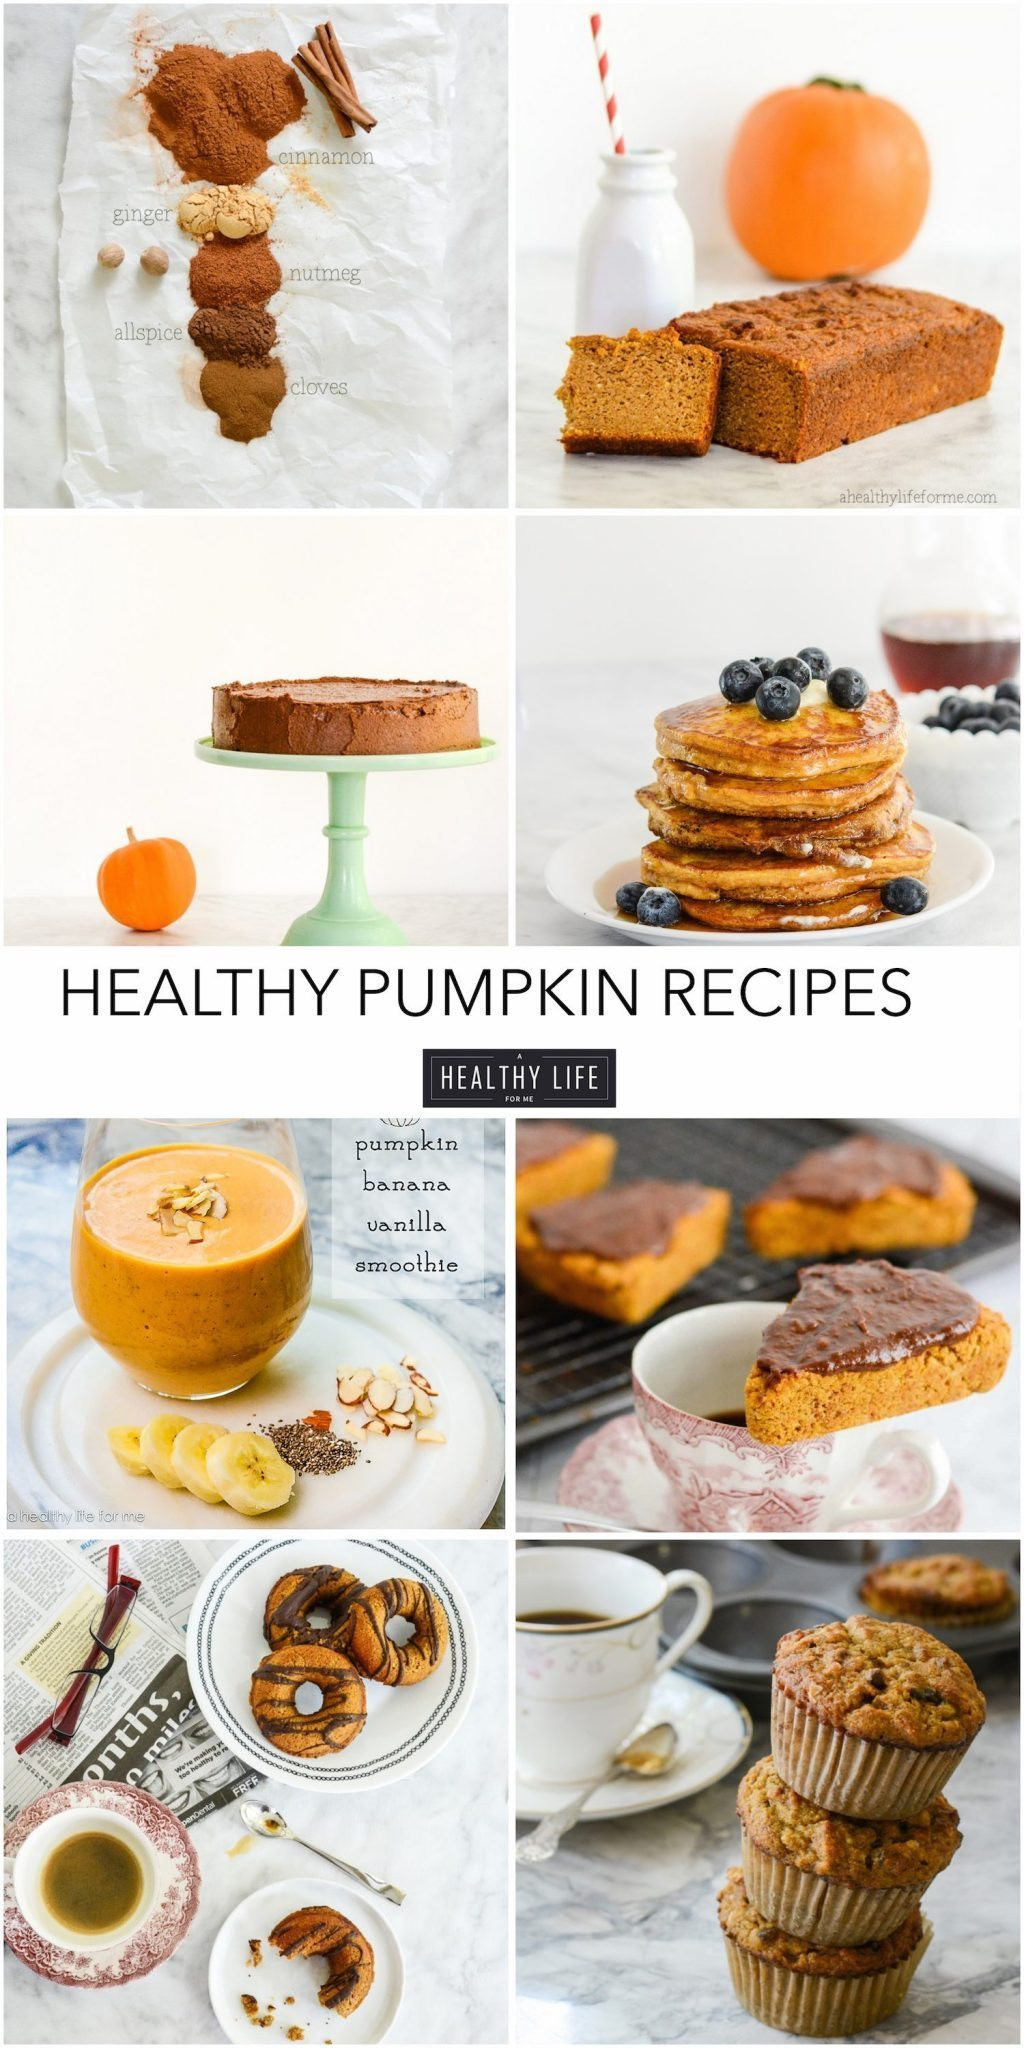 Pumpkin Recipes Healthy
 Healthy Pumpkin Recipes A Healthy Life For Me